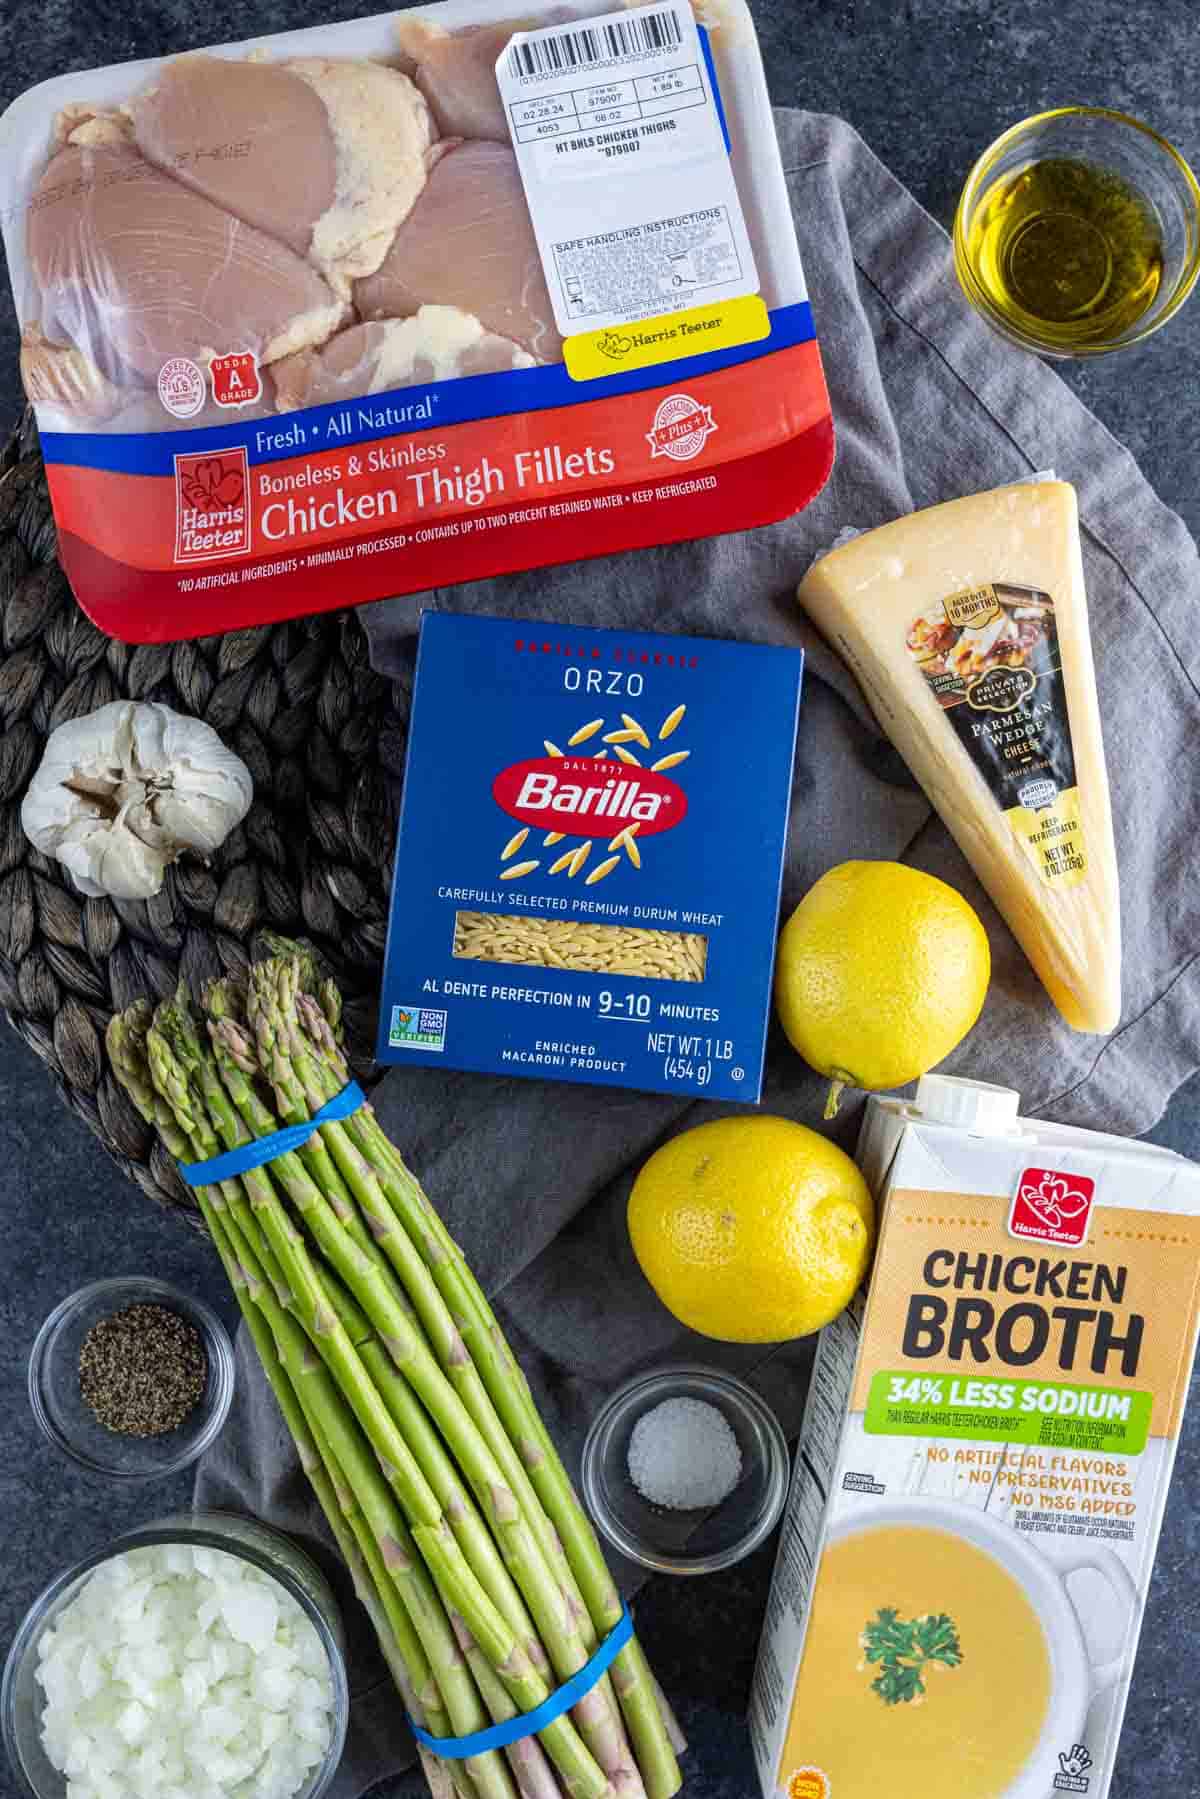 Parmesan Chicken Orzo Ingredients for a recipe including chicken thigh fillets, orzo pasta, parmesan cheese, lemons, asparagus, garlic, chicken broth, olive oil, and spices on a dark surface.